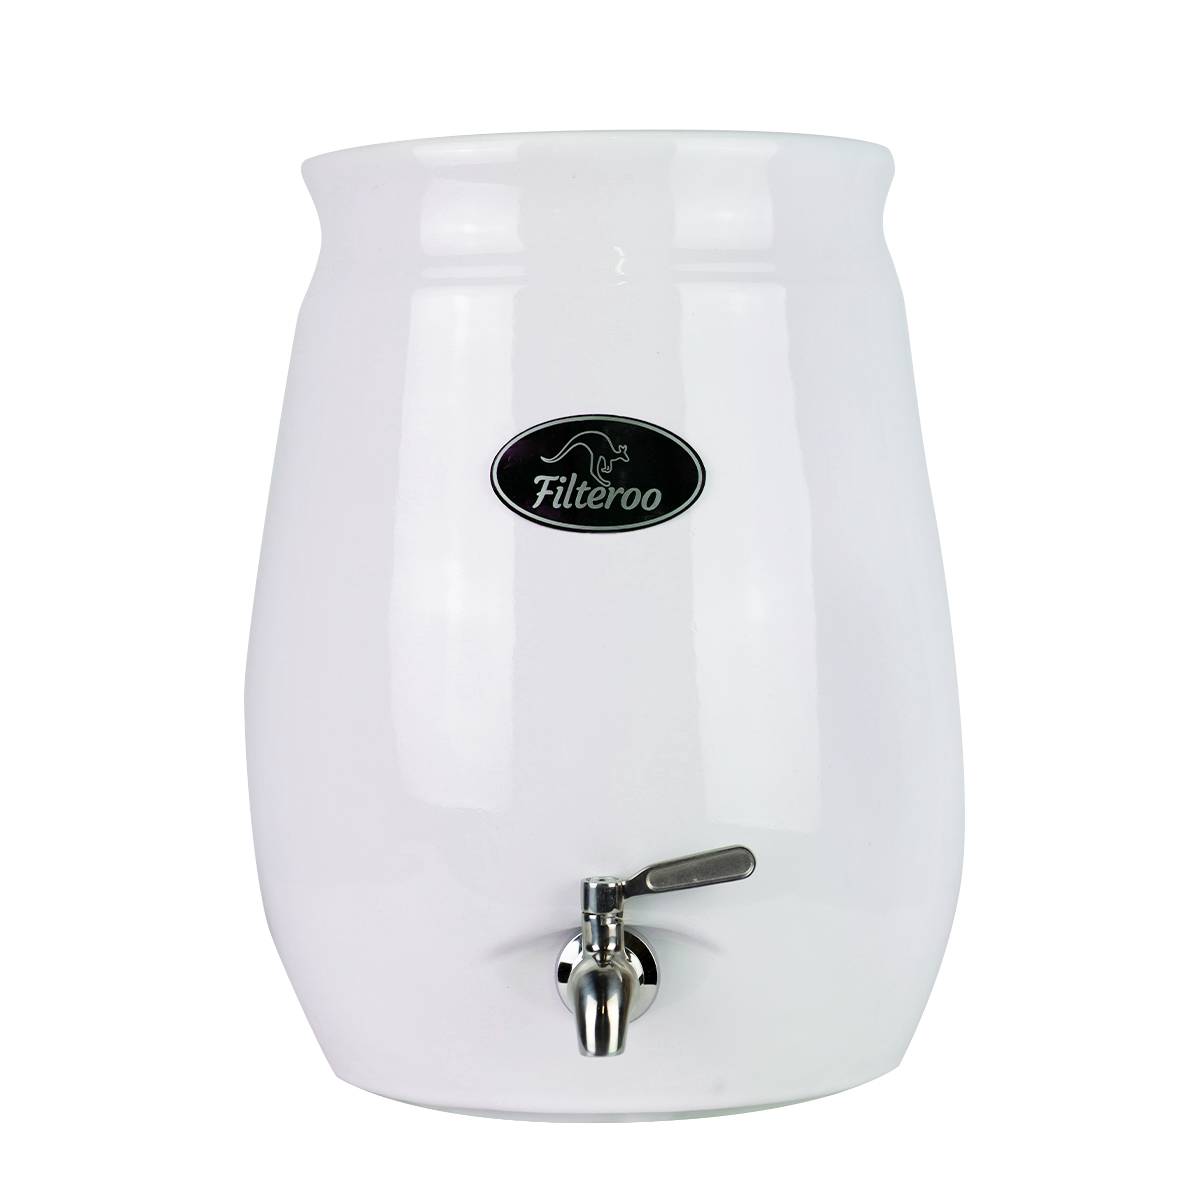 Filteroo® Joey 12L Gravity Ceramic Water Filter with Grander Revitalised Structured Water8